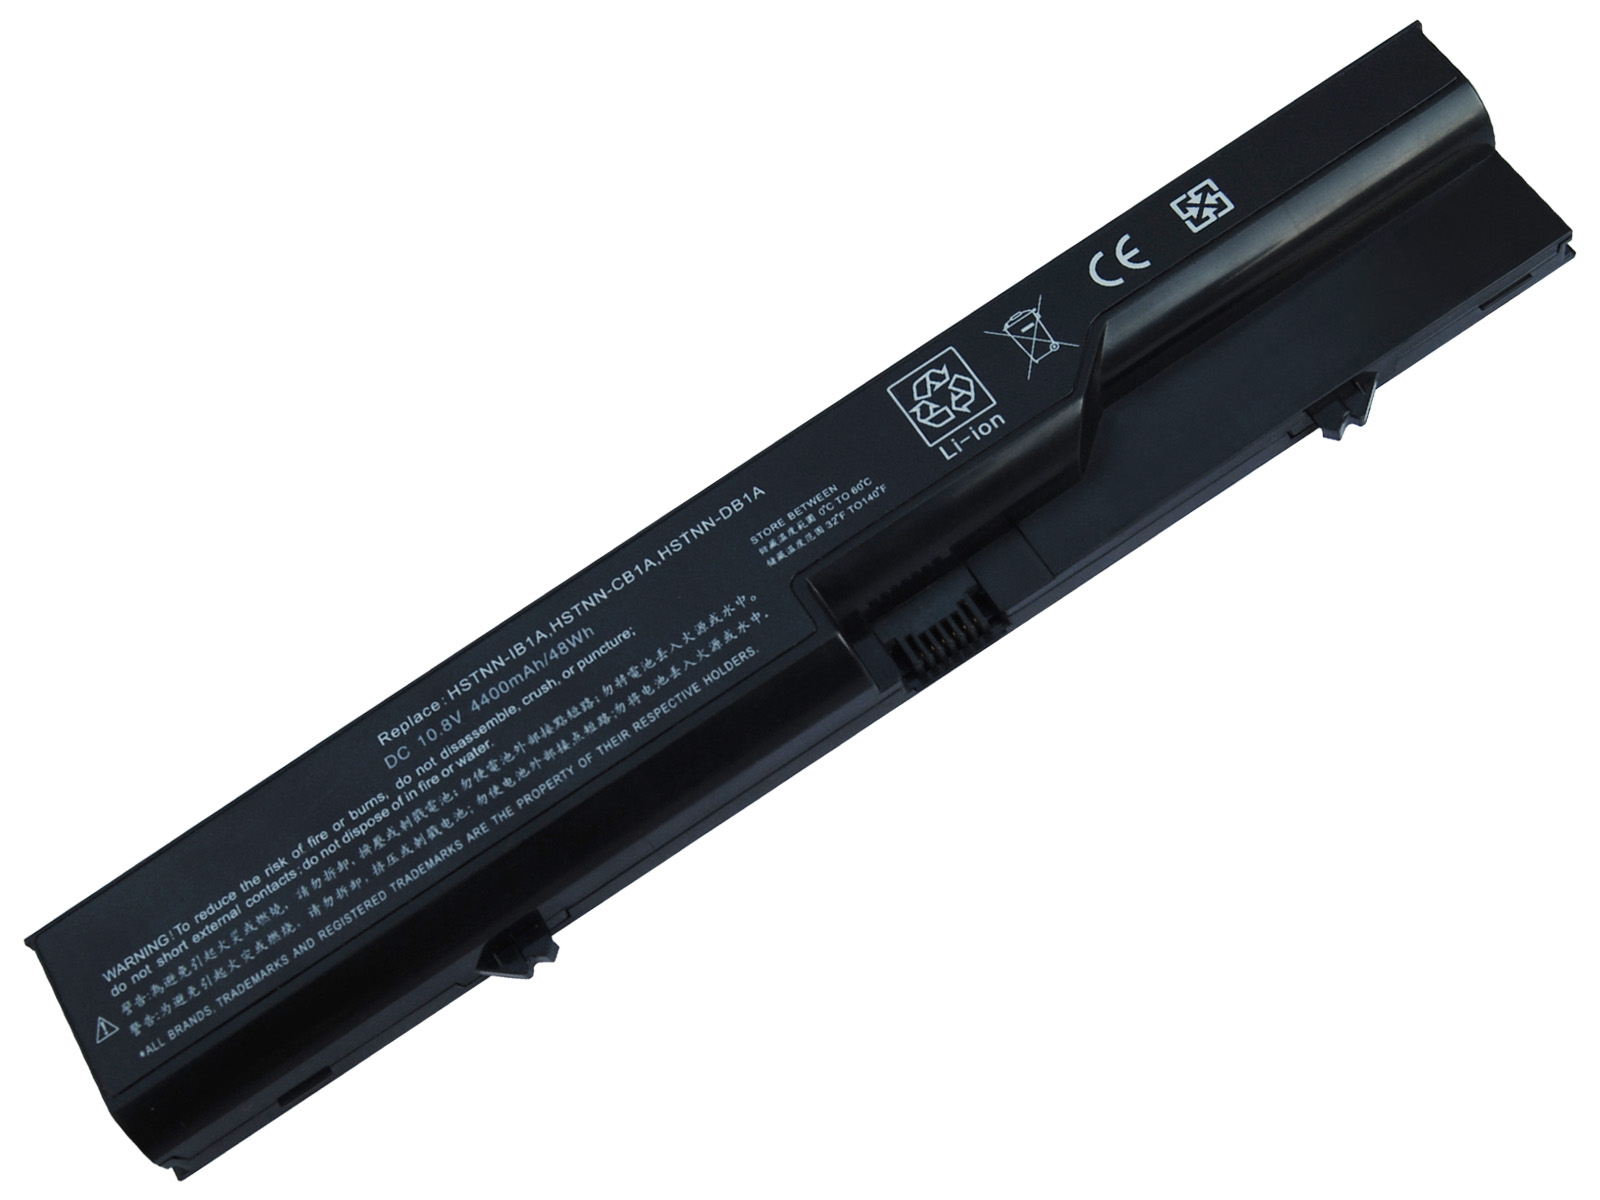 Superb Choice® 6-cell HP PH06 Laptop Battery - image 1 of 2